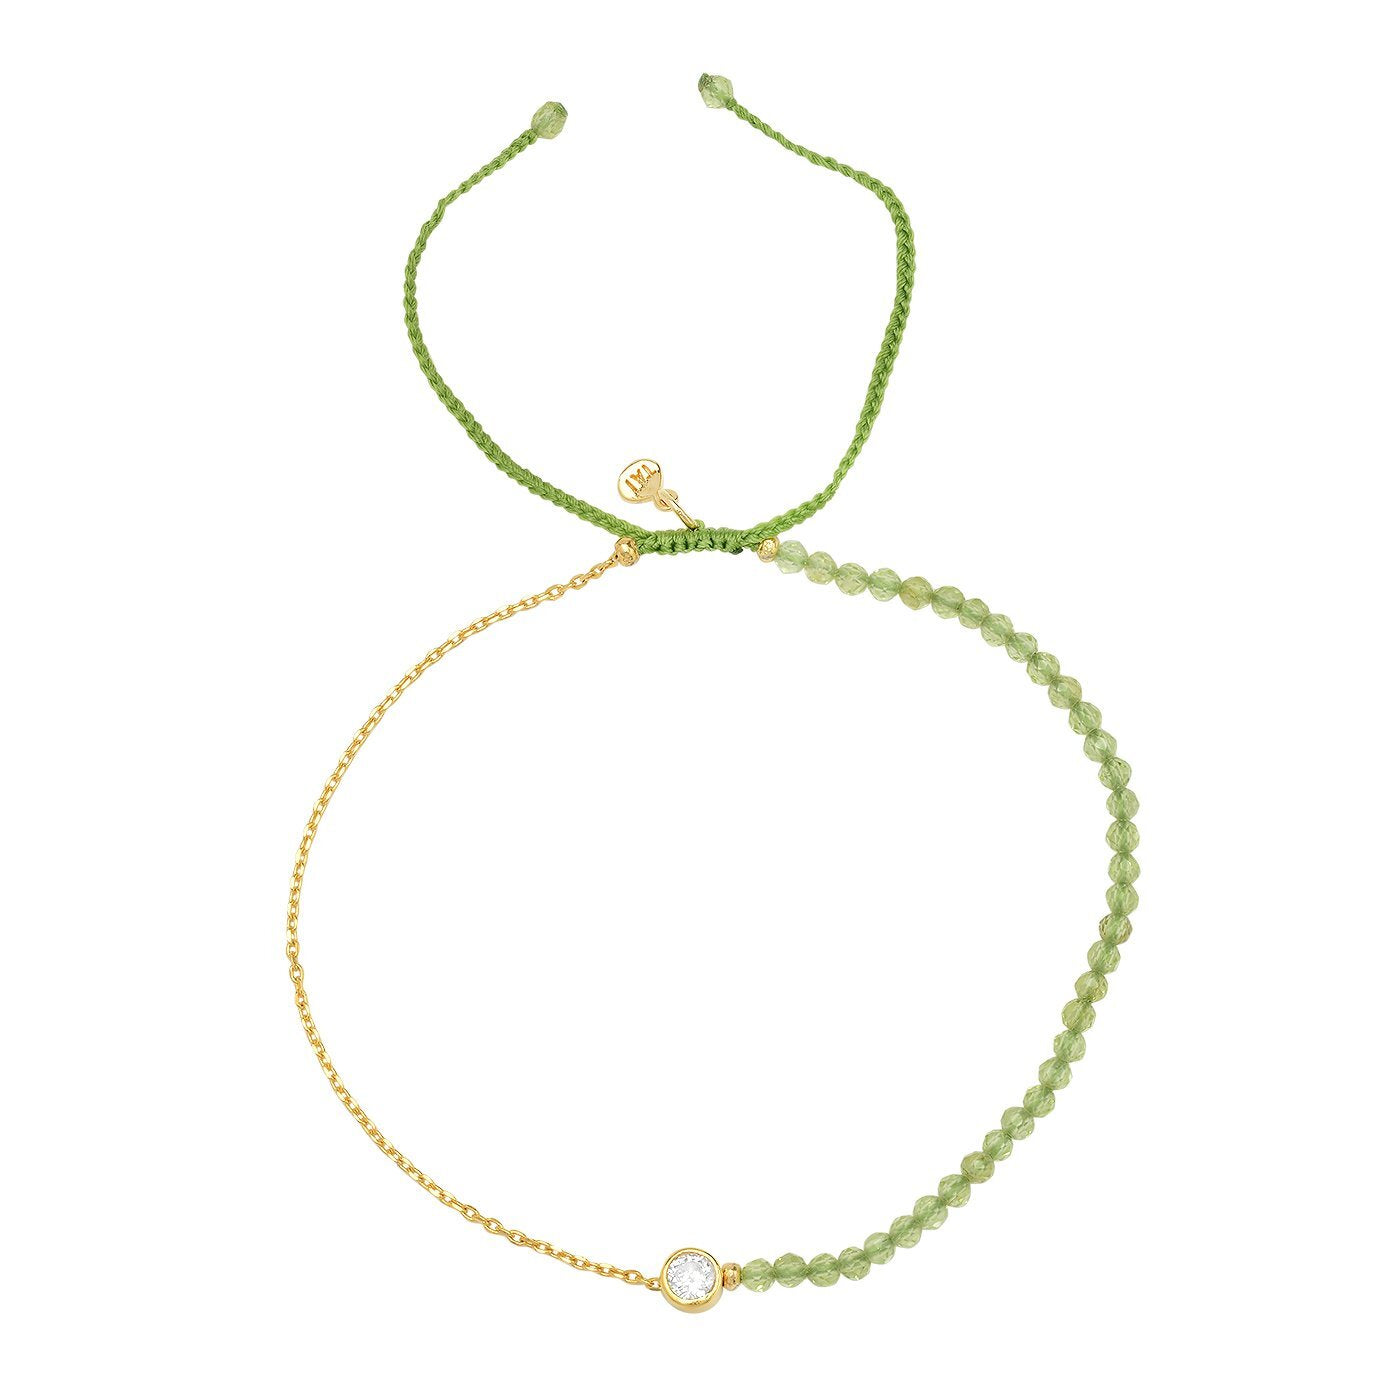 Green woven pull-tie closure, stone beads, gold-plated brass chain